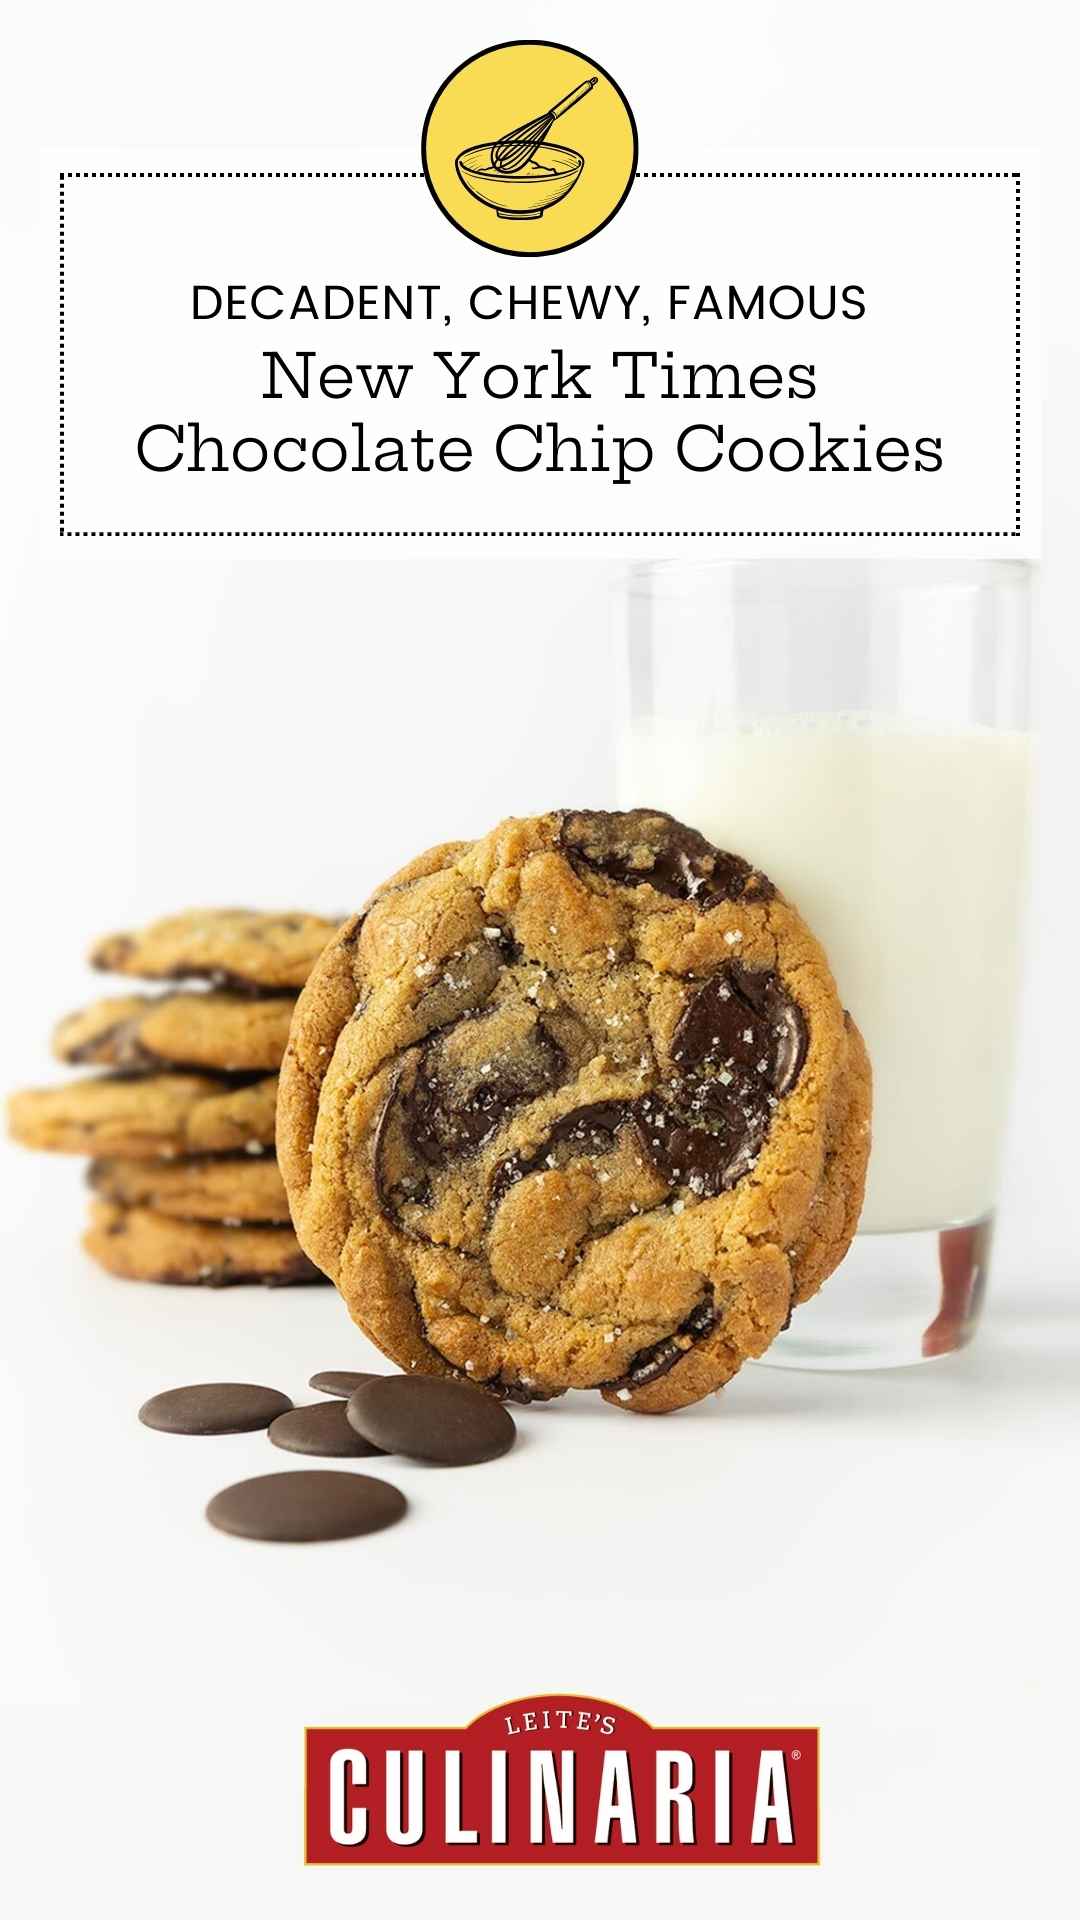 A chocolate chip cookie leaning against a glass of milk with several more stacked in the background.